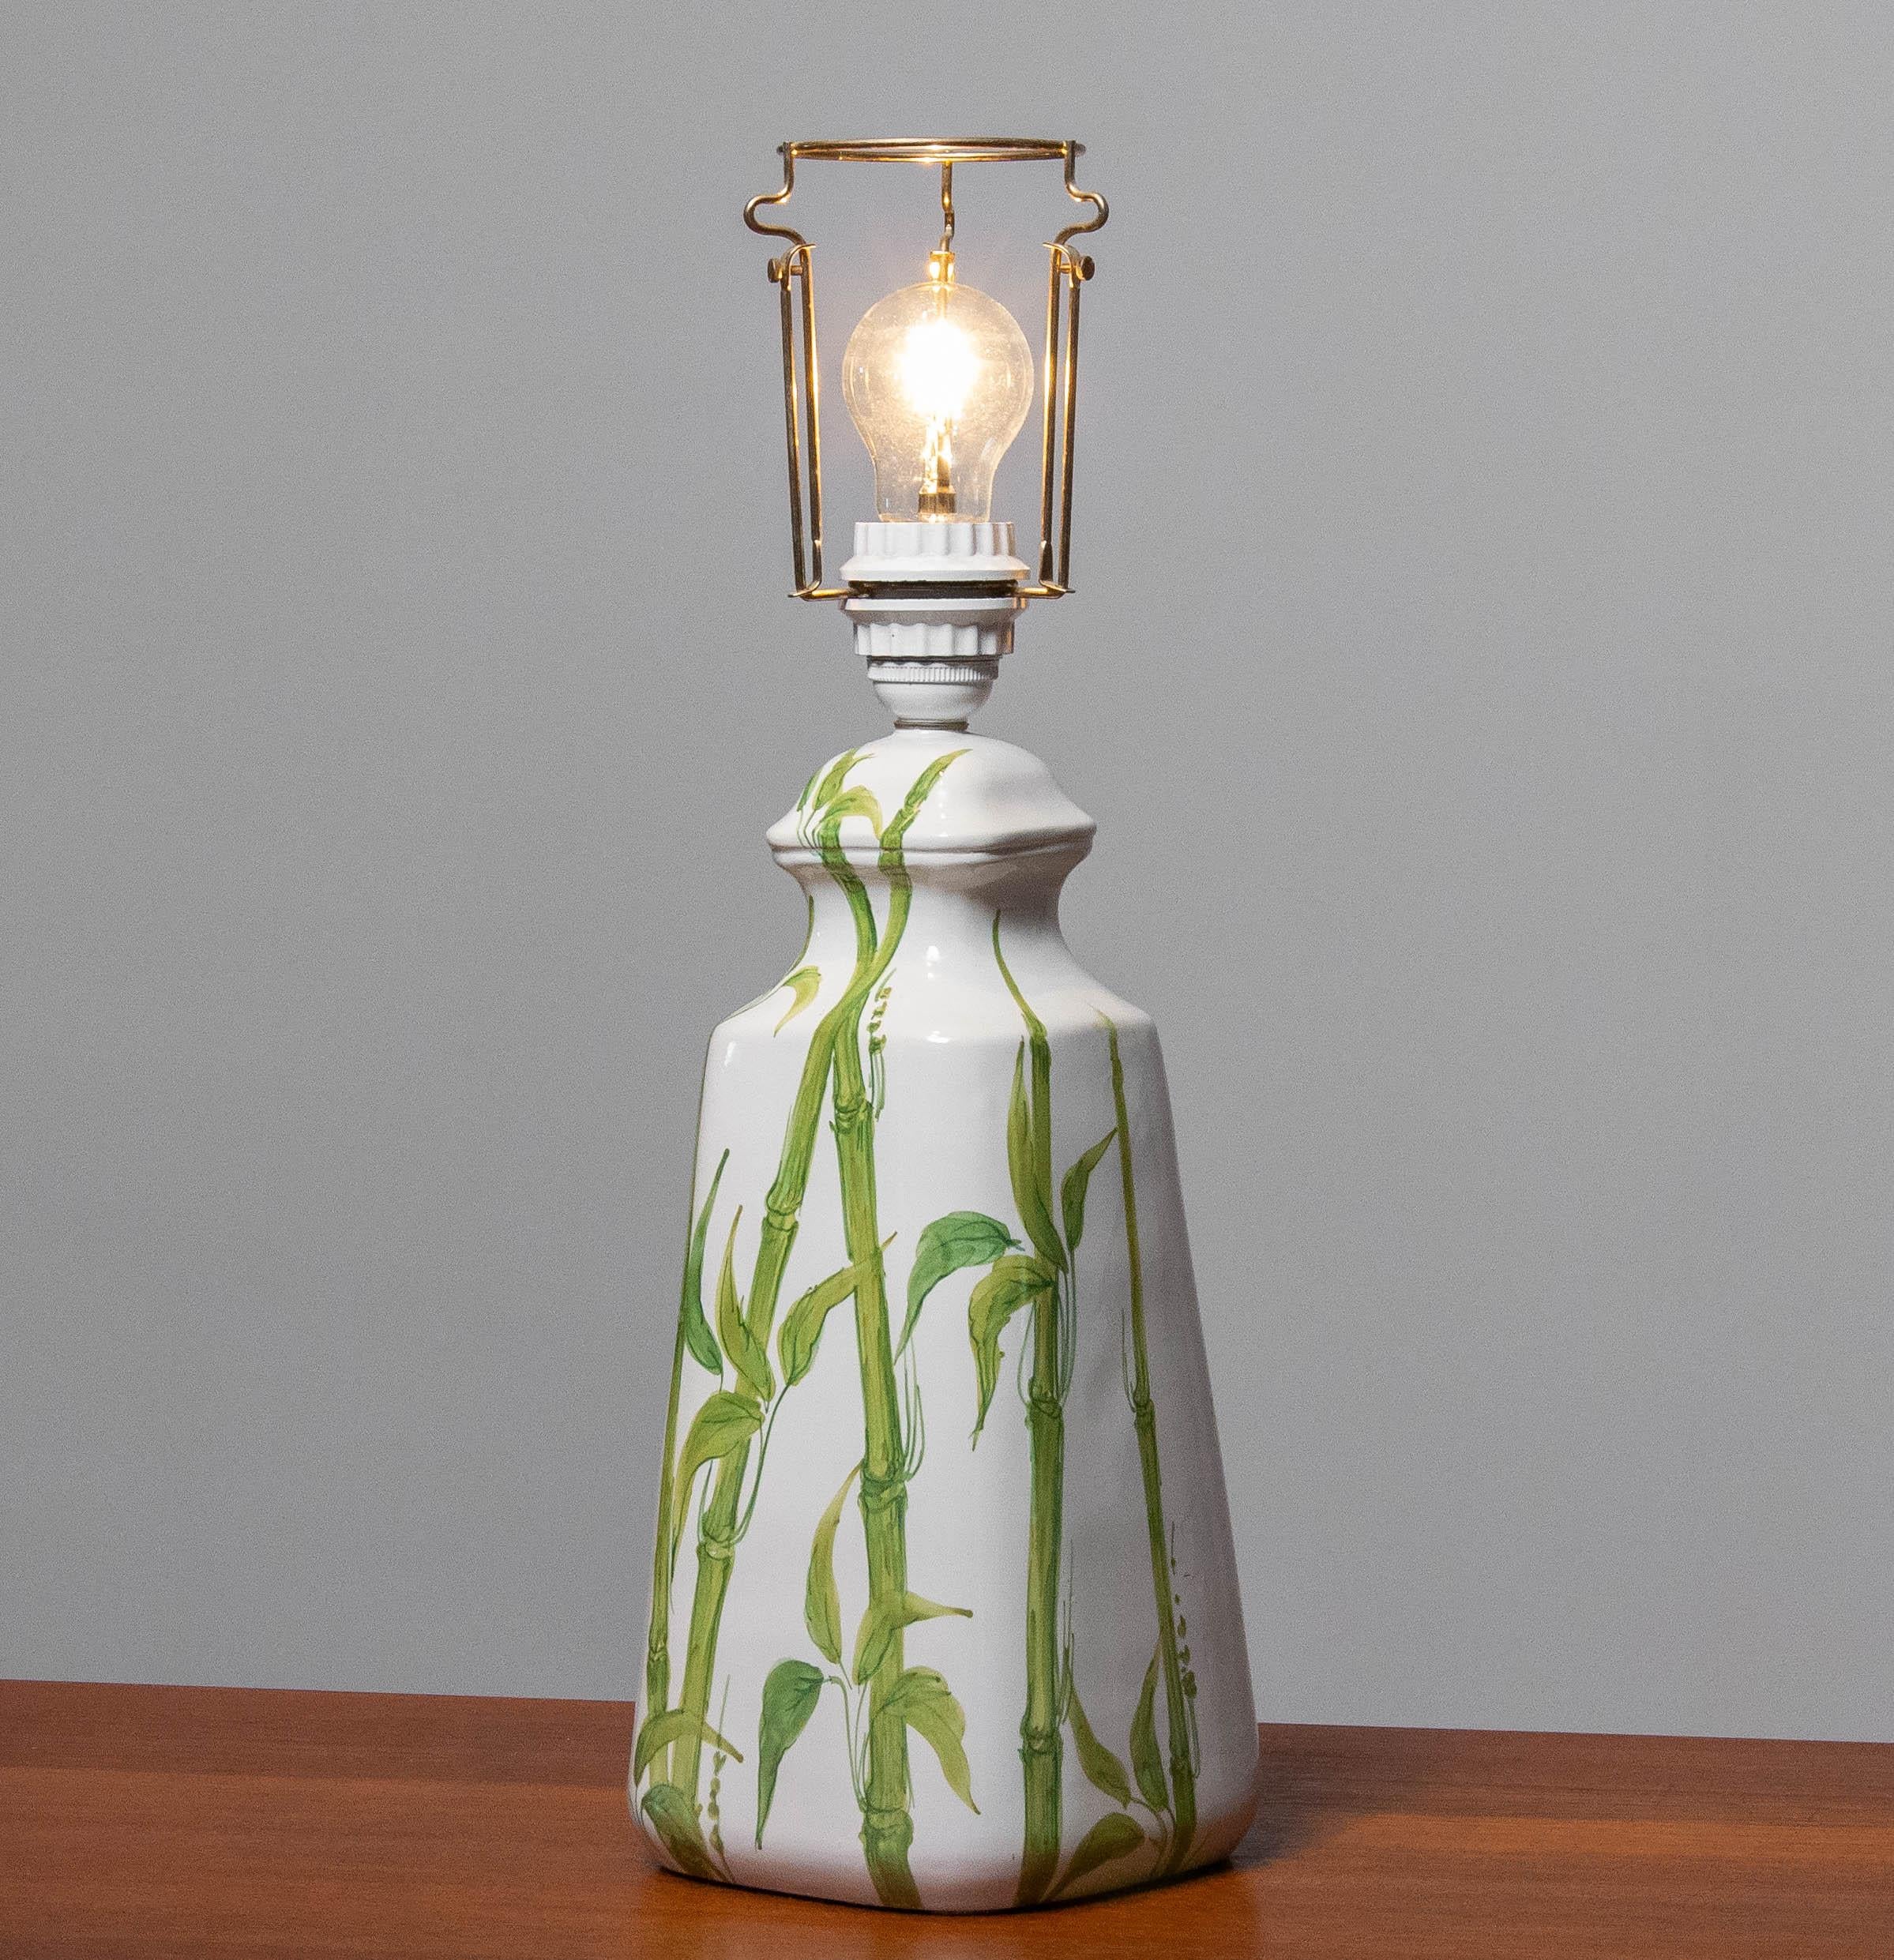 1960s Italian Hand Painted White Ceramic and Glazed Table Lamp with Bamboo Decor In Good Condition For Sale In Silvolde, Gelderland